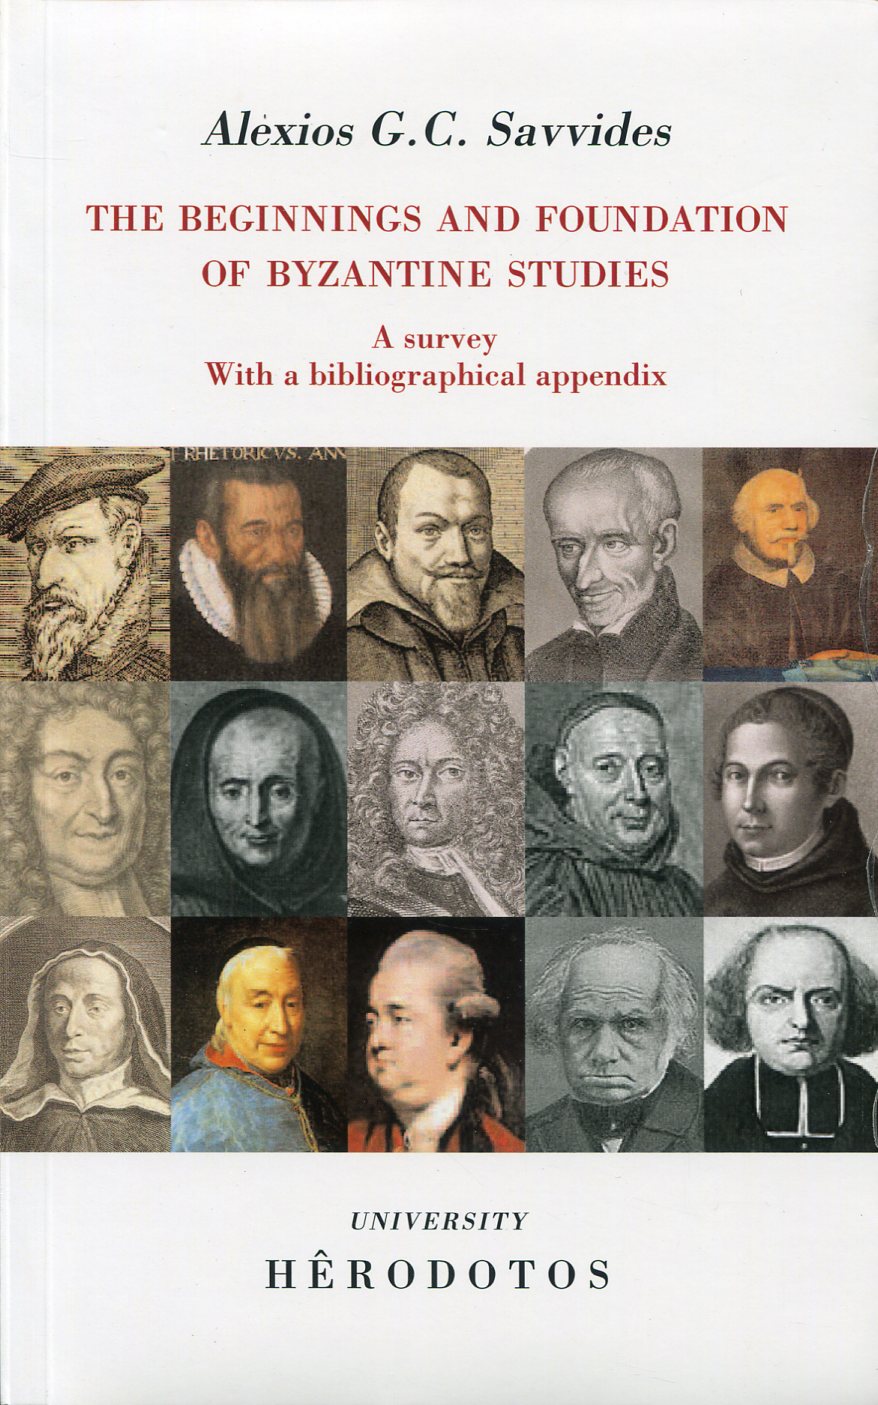 THE BEGINNINGS AND FOUNDATION OF BYZANTINE STUDIES